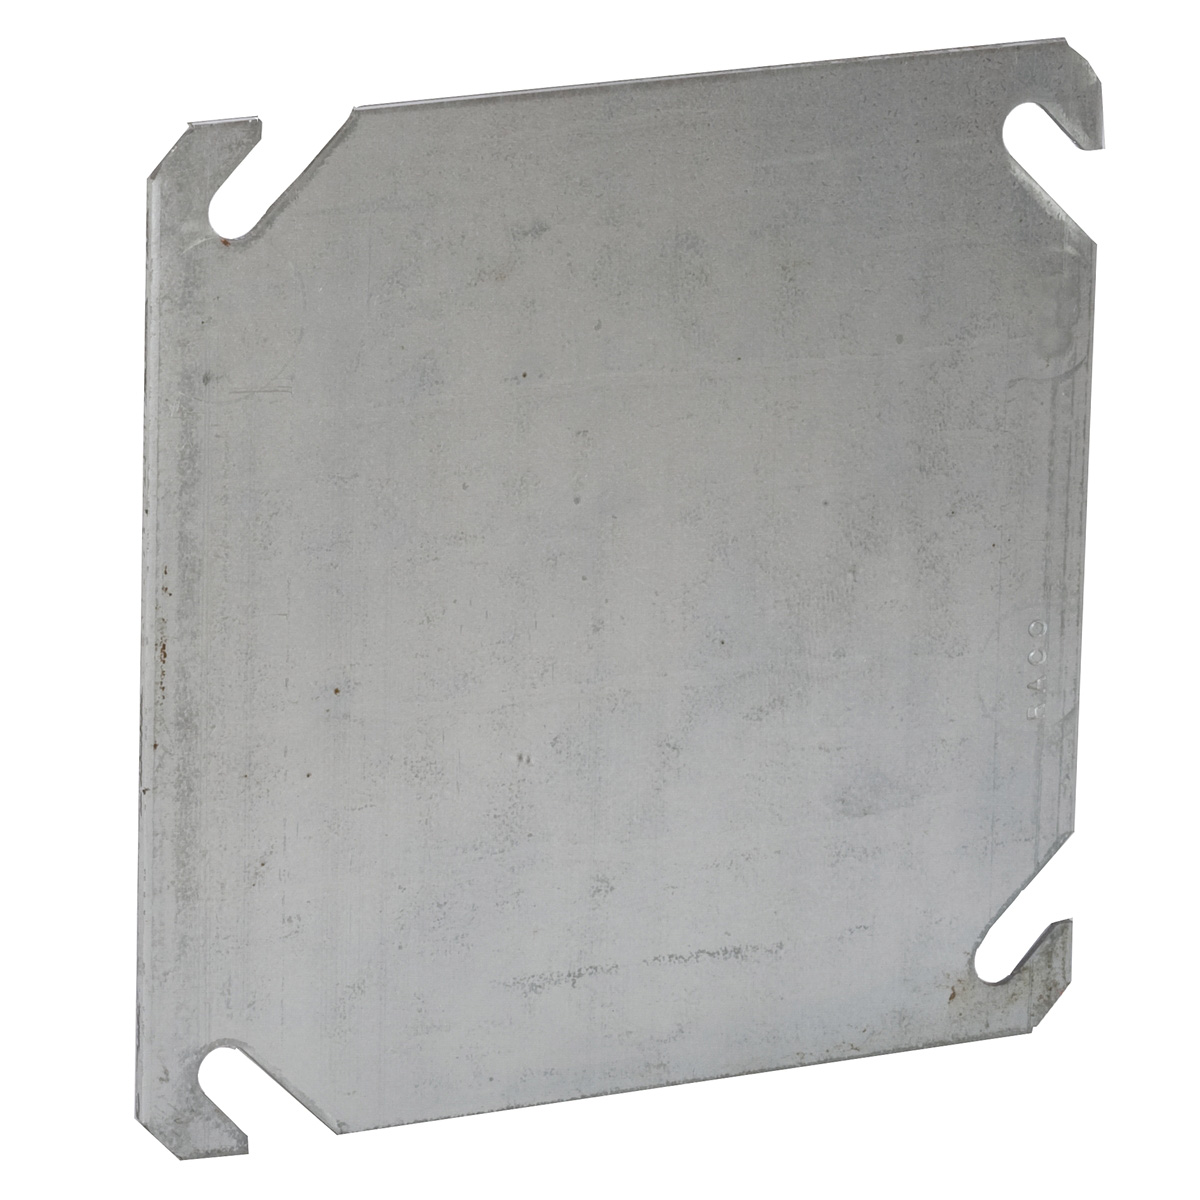 752 Electrical Box Flat Cover, 0.063 in L, 4 in W, Square, Stamped Steel, Silver, Pre-Galvanized